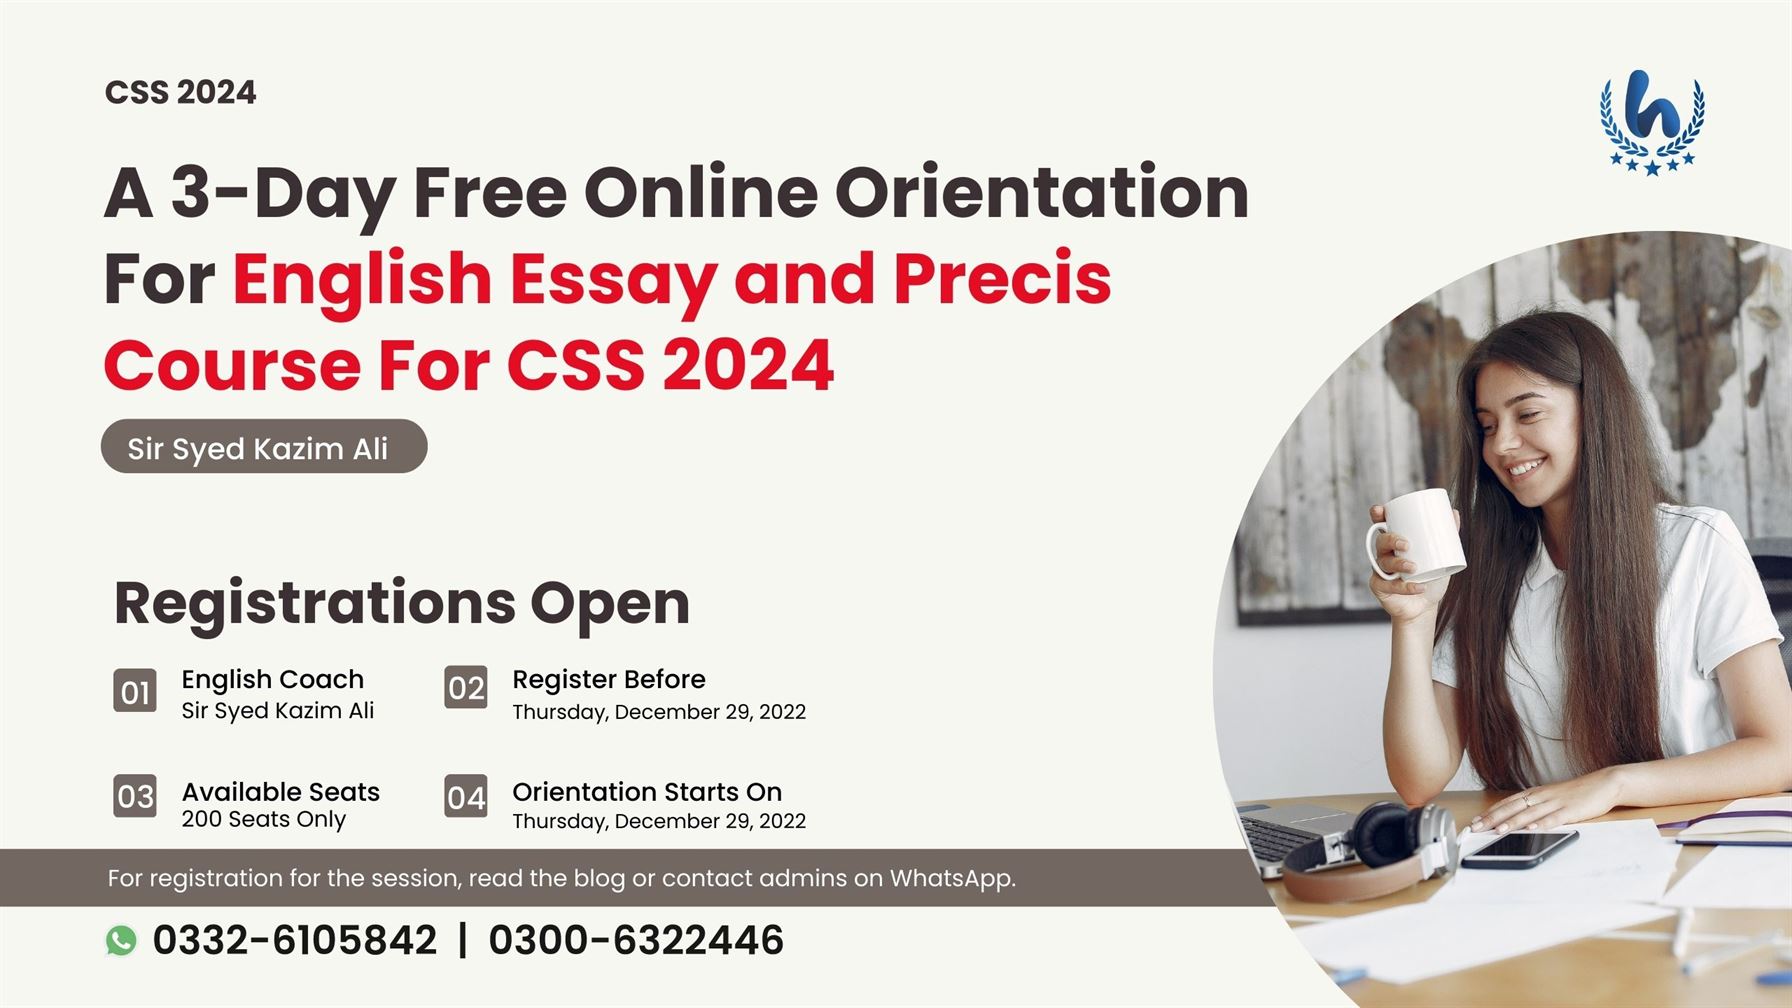 ree-Online-Orientation-For-English-Essay-and-Precis-Course-For-CSS-2024